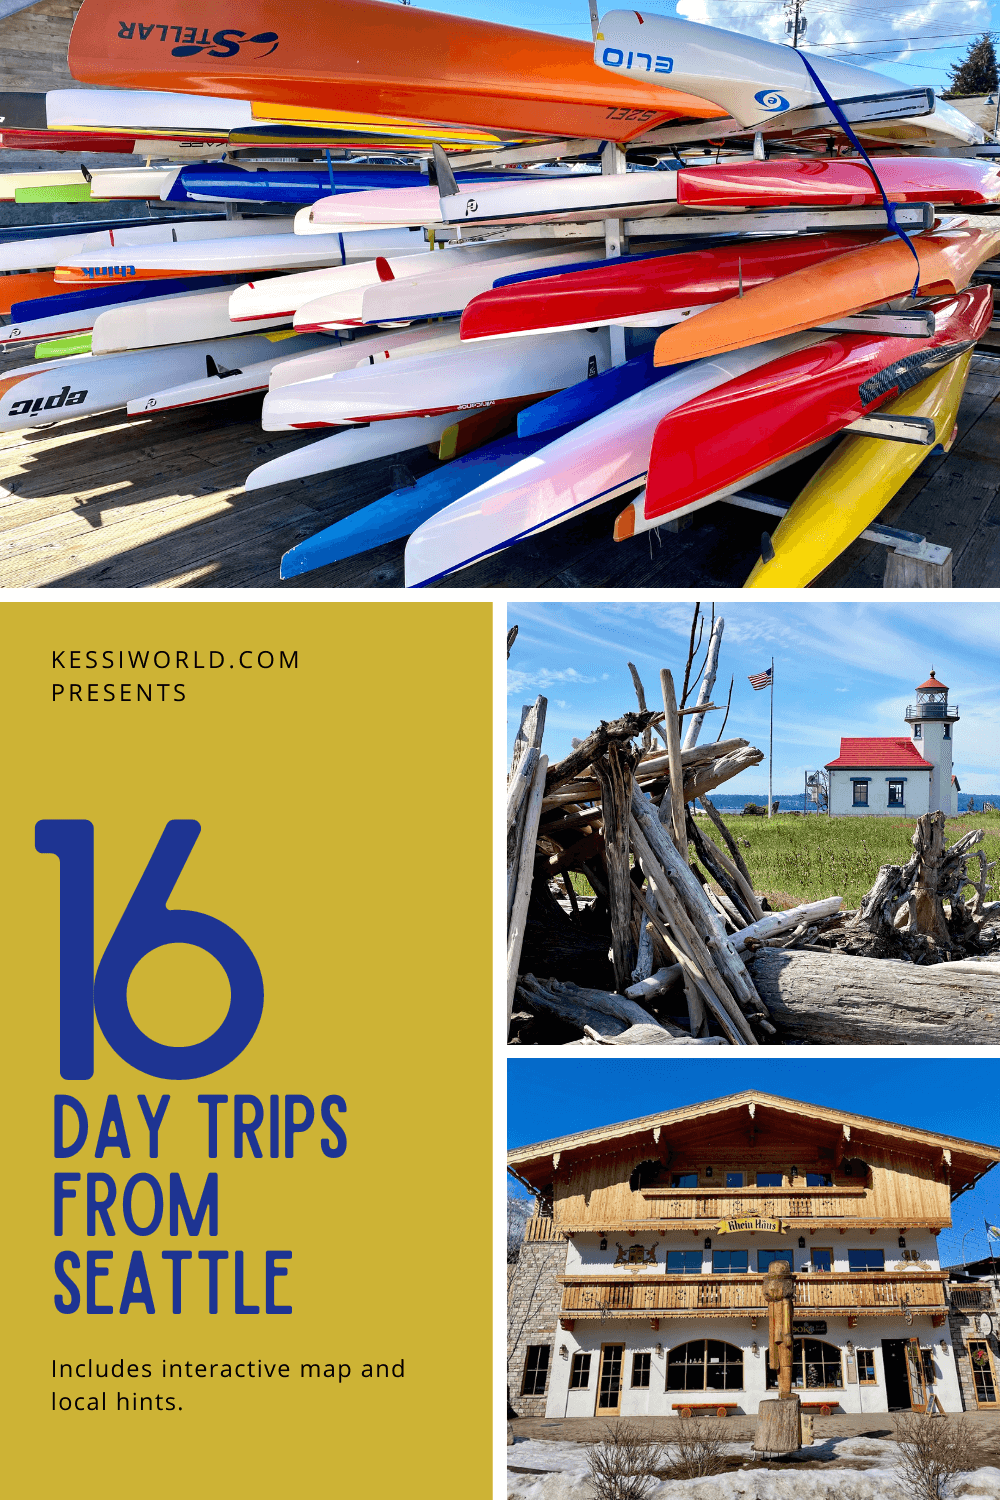 This Pinterest pin shows three photos depicting day trips from Seattle.  The largest photo is a bunch of kayaks stacked up outside a boathouse while the other two photos are a lighthouse and Germany style building in Leavenworth.